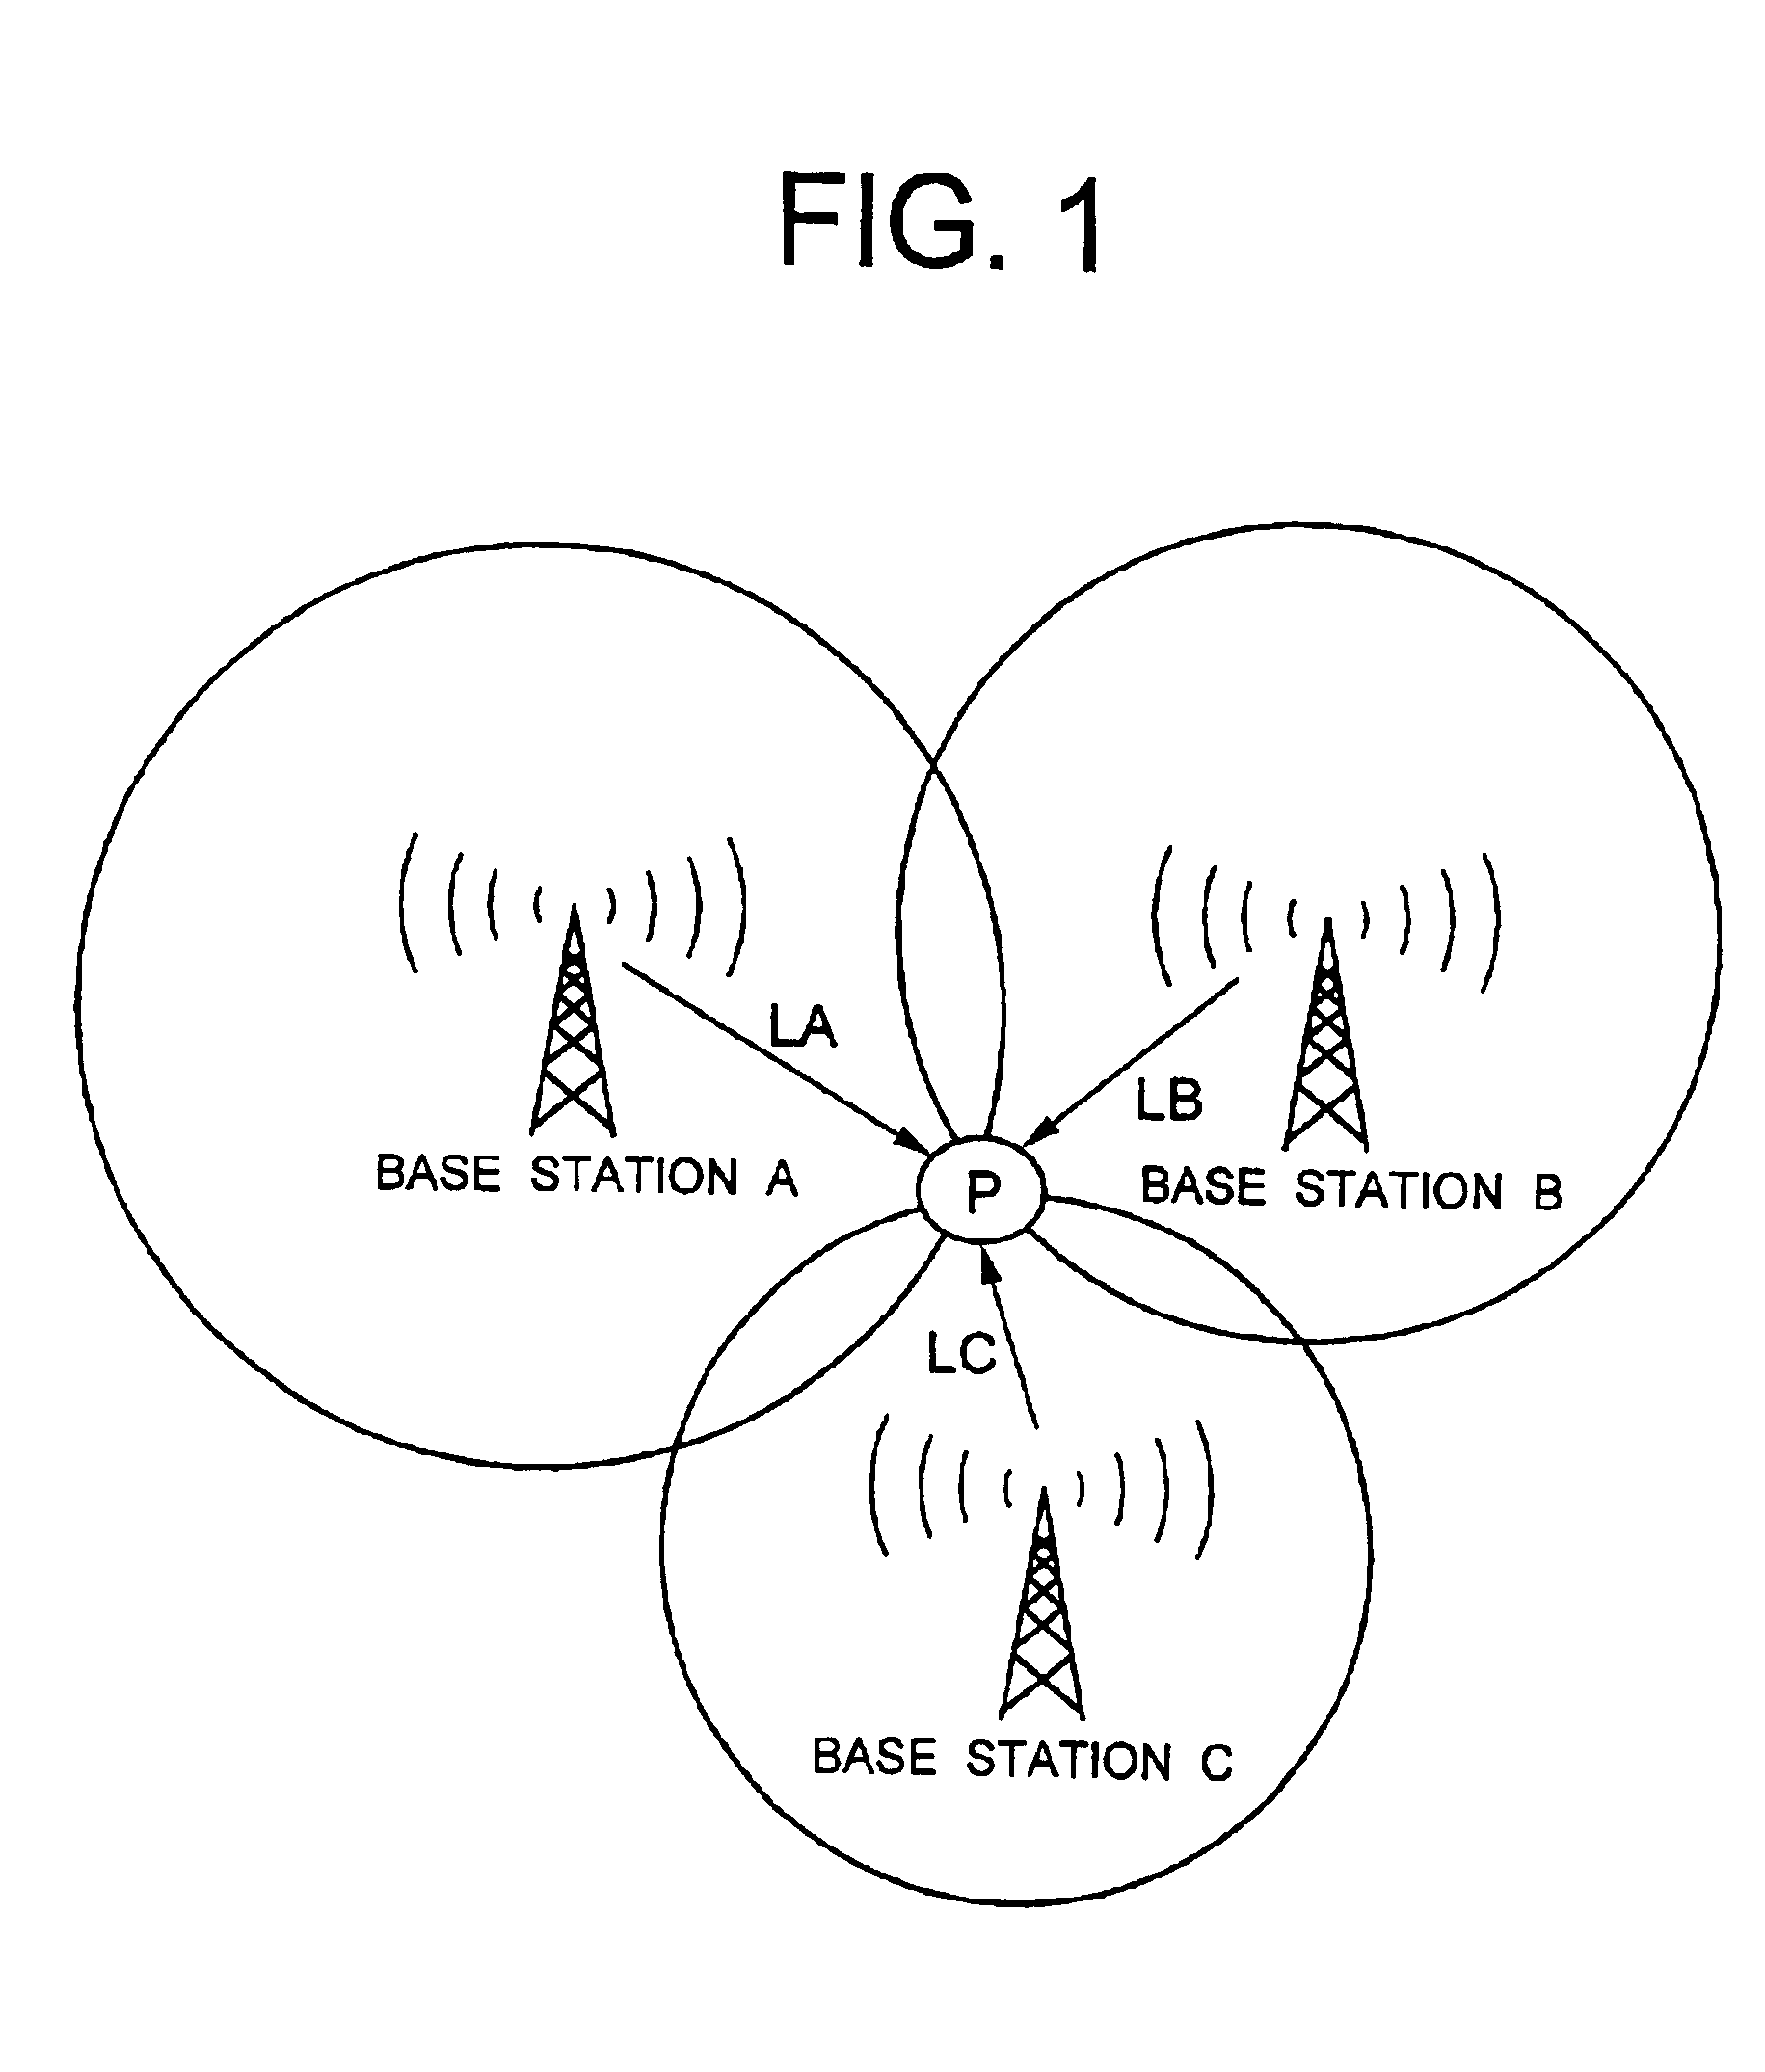 Method and apparatus for positioning a mobile station